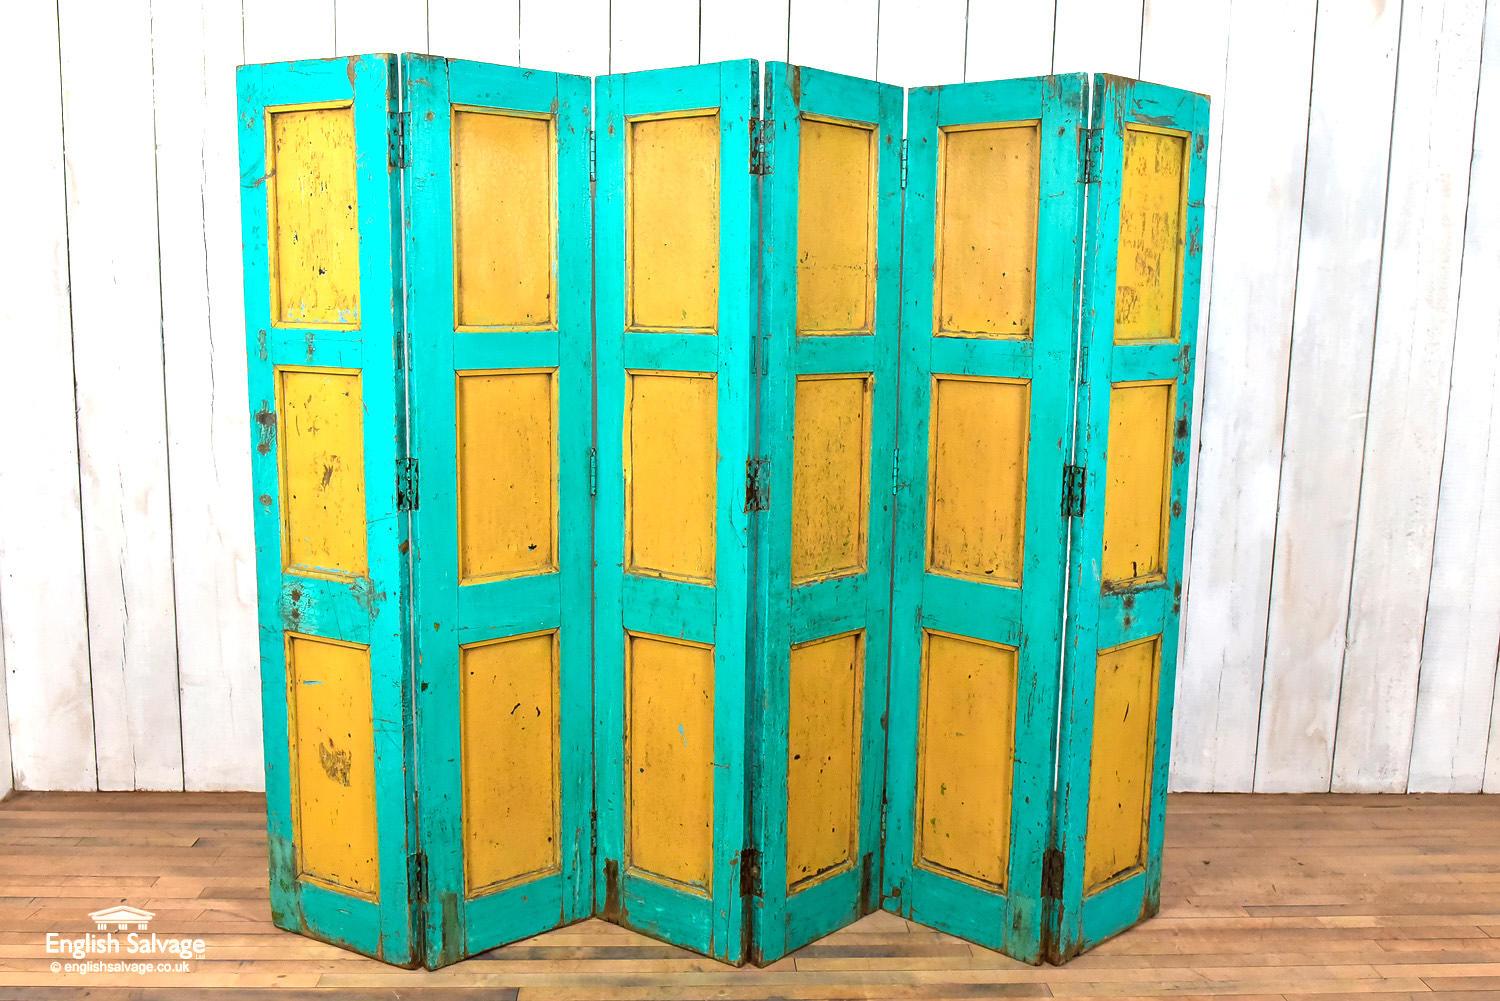 Reclaimed wood paneling in a vibrant teal and yellow color. The reverse is solid turquoise in color. The paint has a weathered patina with some age-related wear and scrapes. The screen is made up of six individual hinged panels (each with a width of